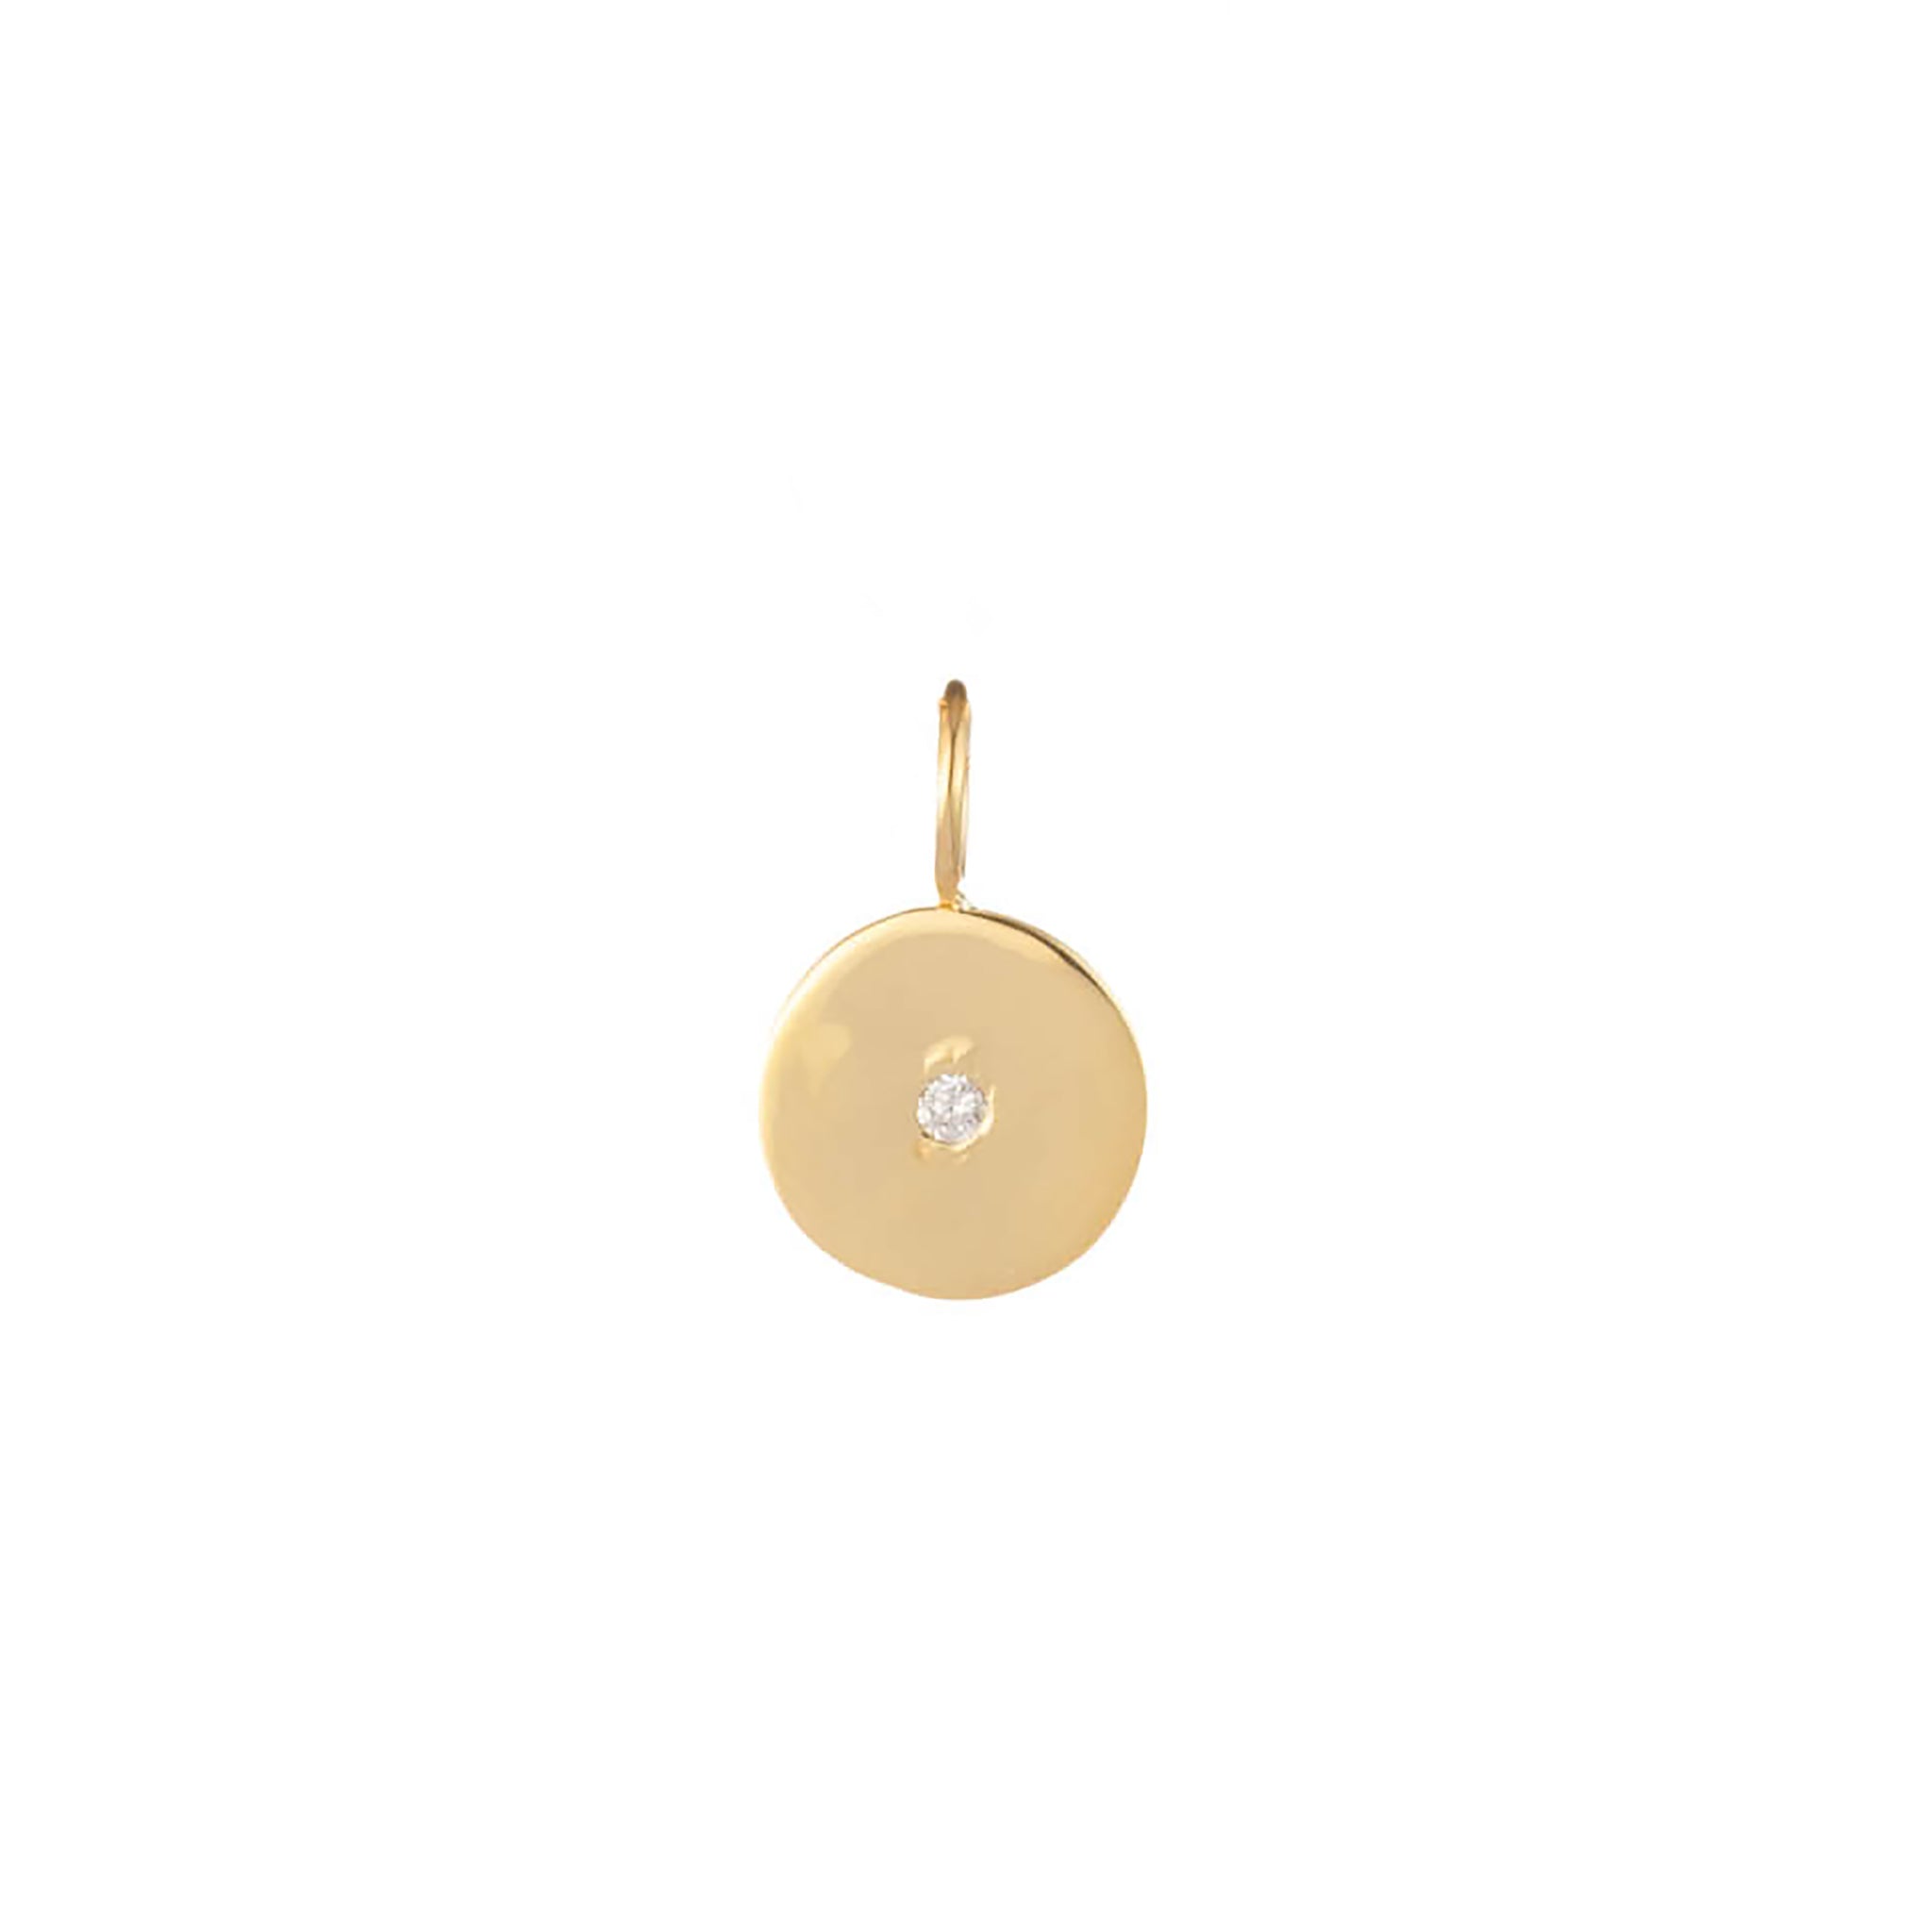 gold diamond charm similar to wwake fine delicate charms for layering